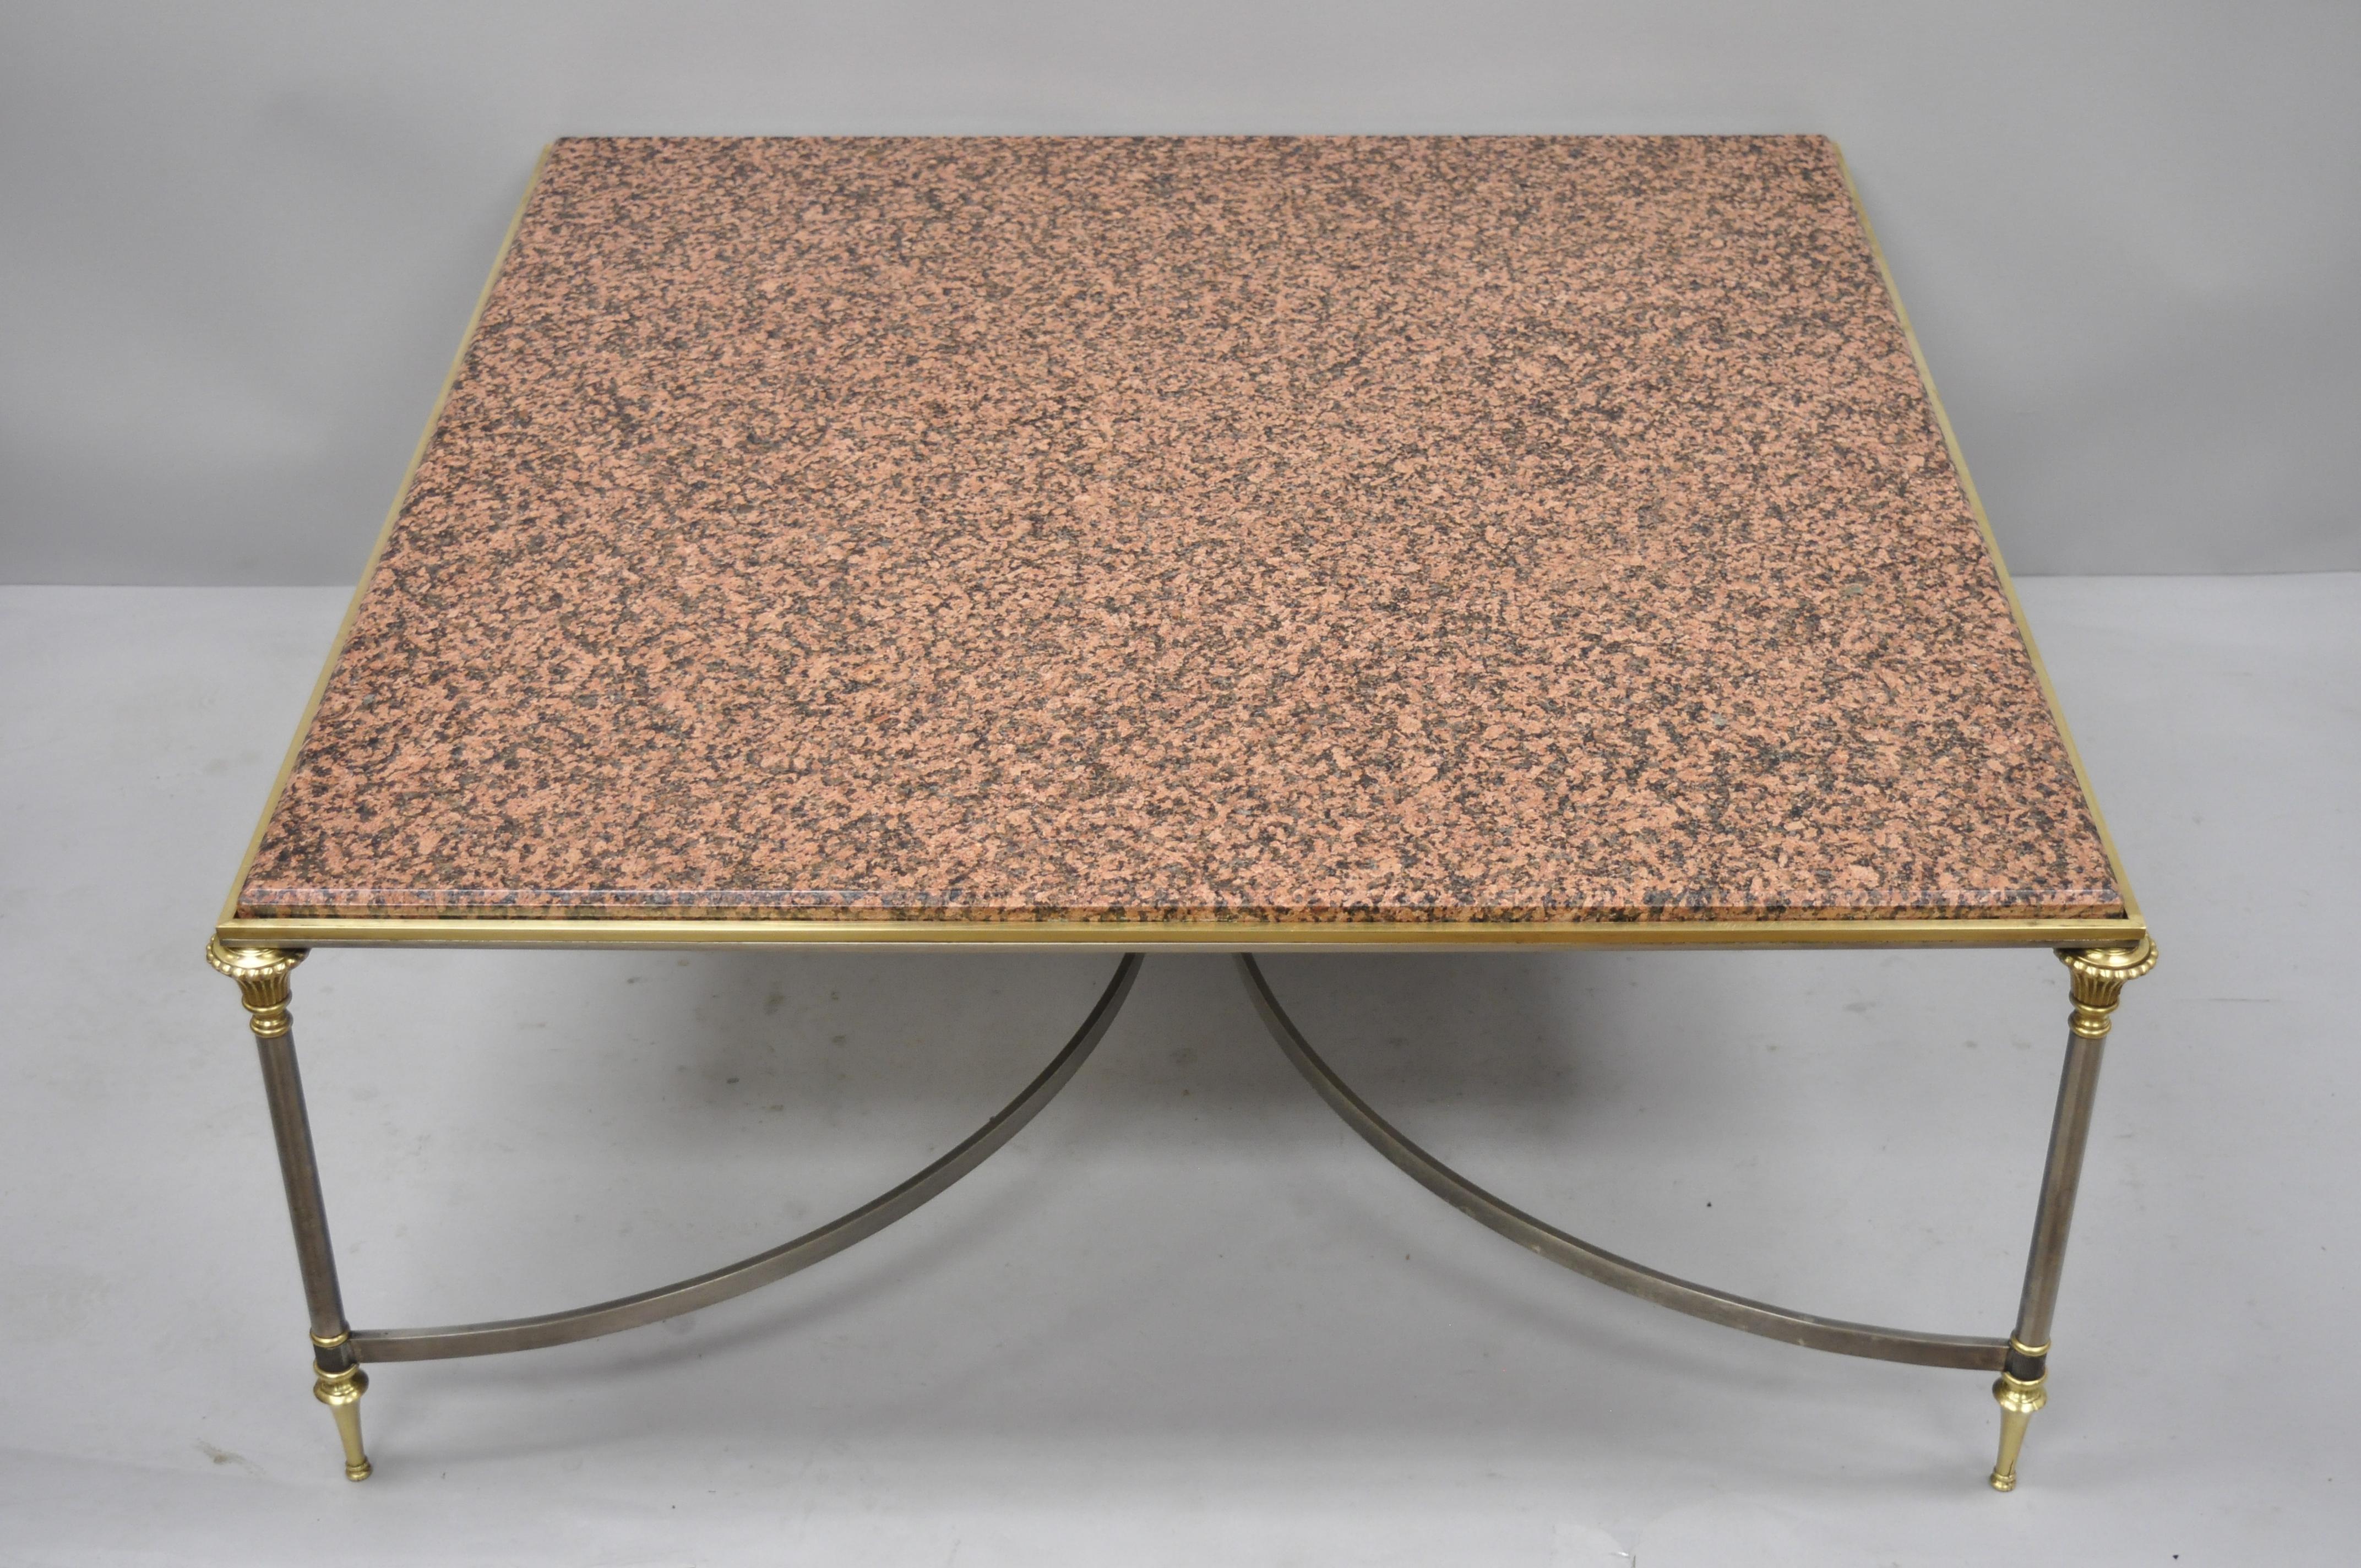 Large square pink marble top steel and brass coffee table attributed to Maison Jansen. Item features inset pink marble top, large steel frame, brass accents, signed 